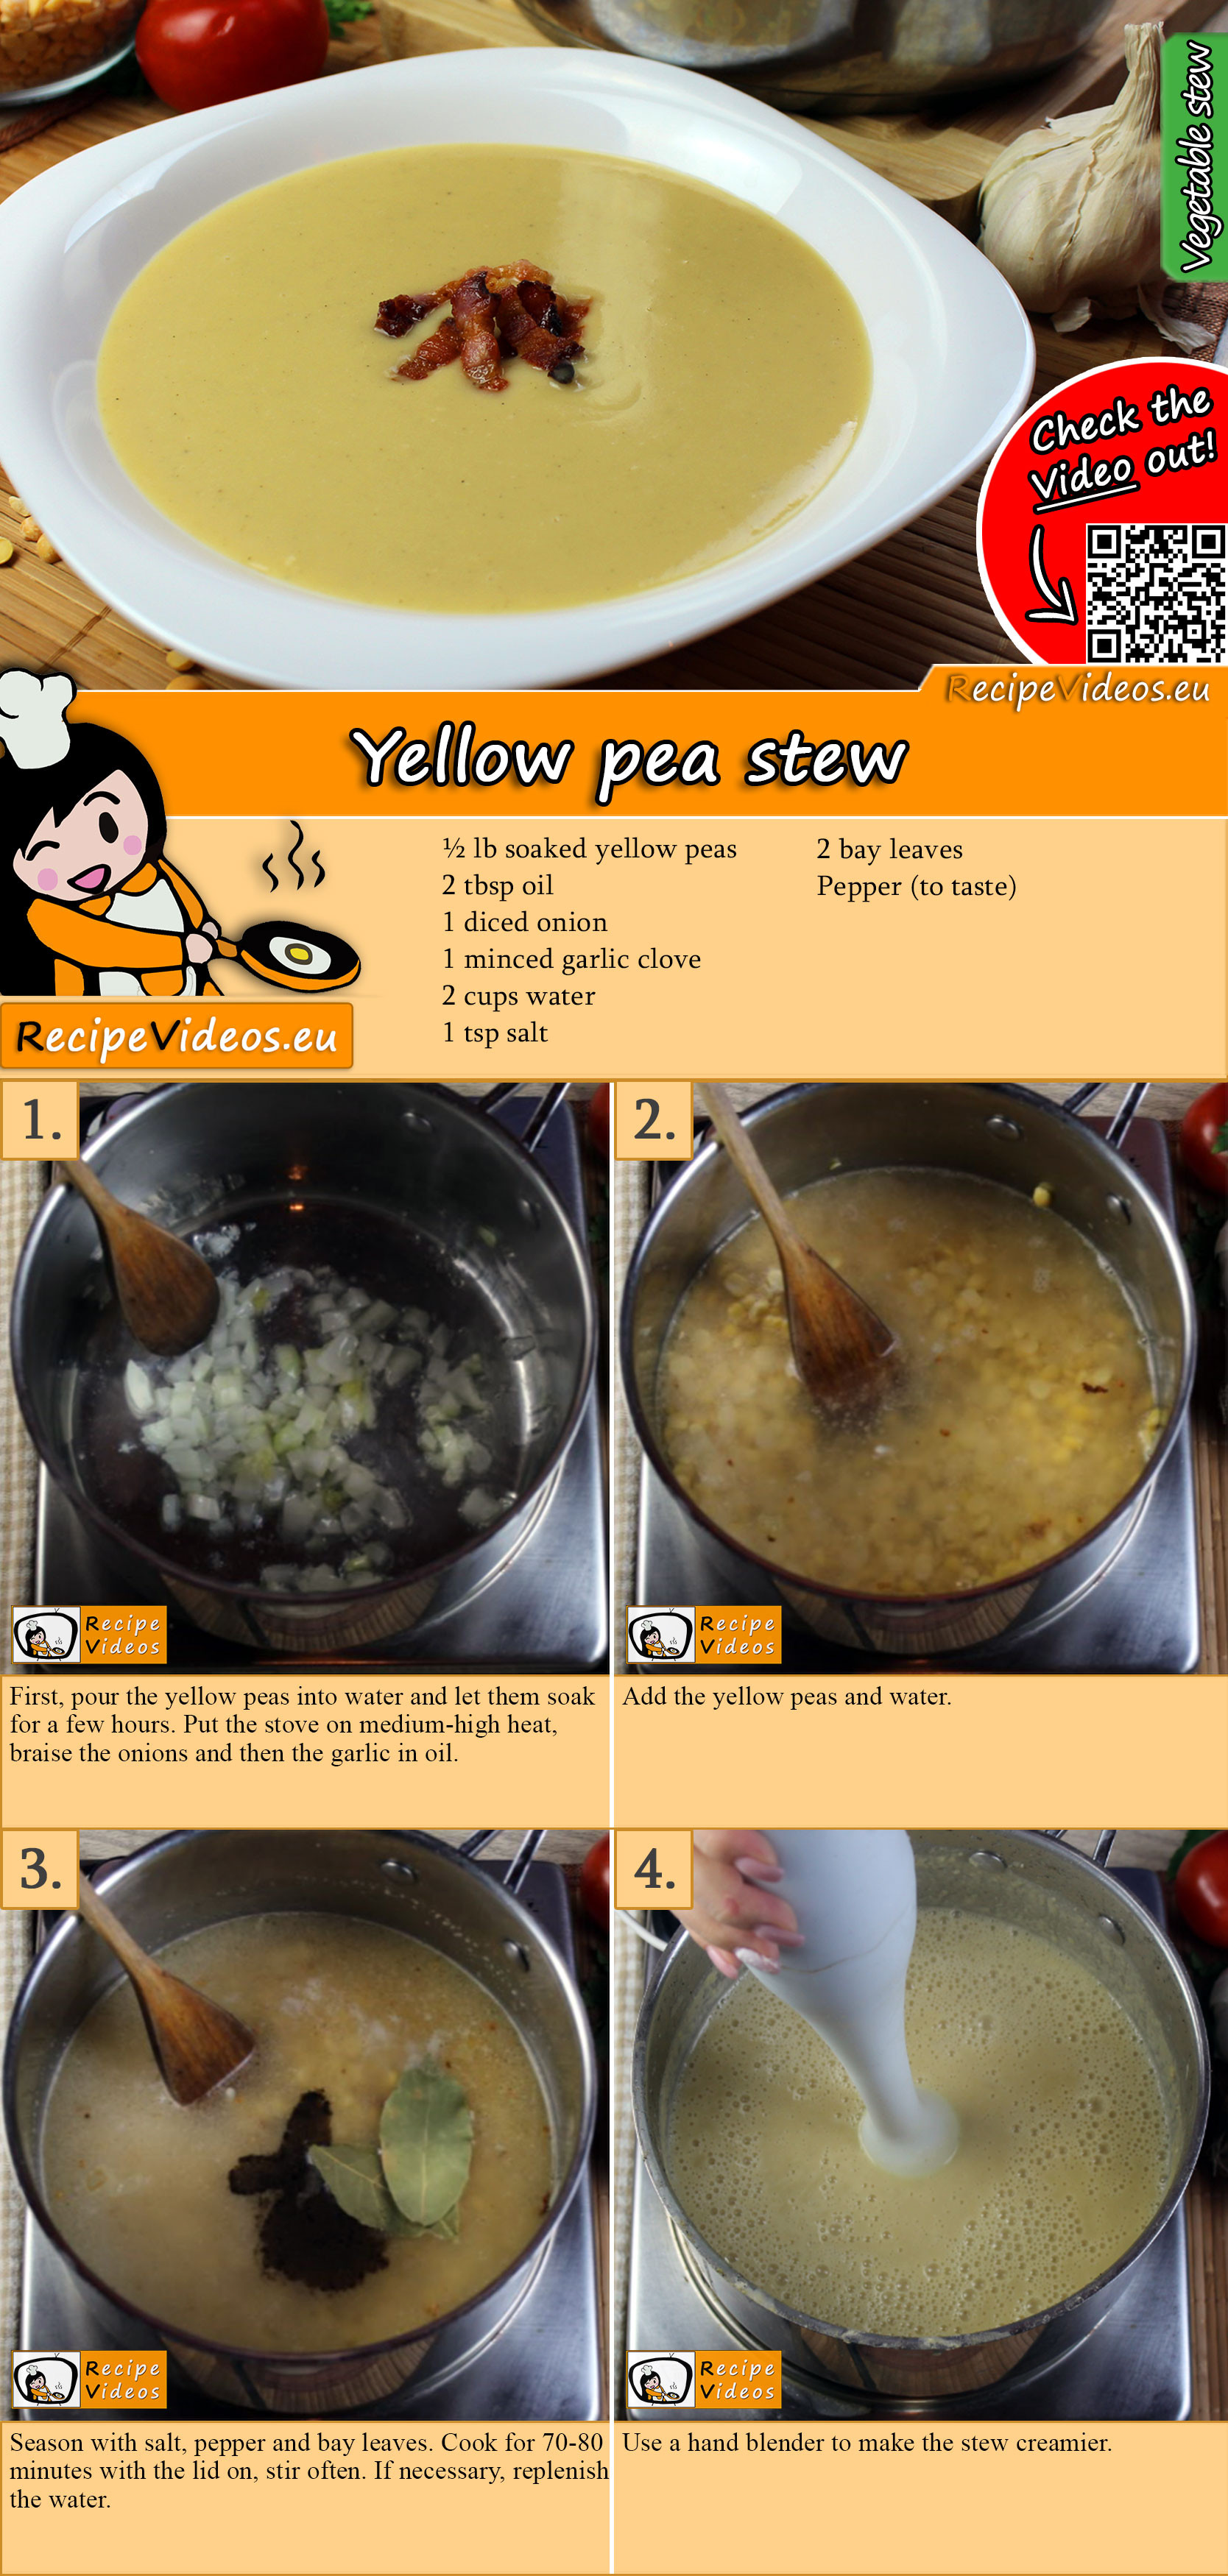 Yellow pea stew recipe with video